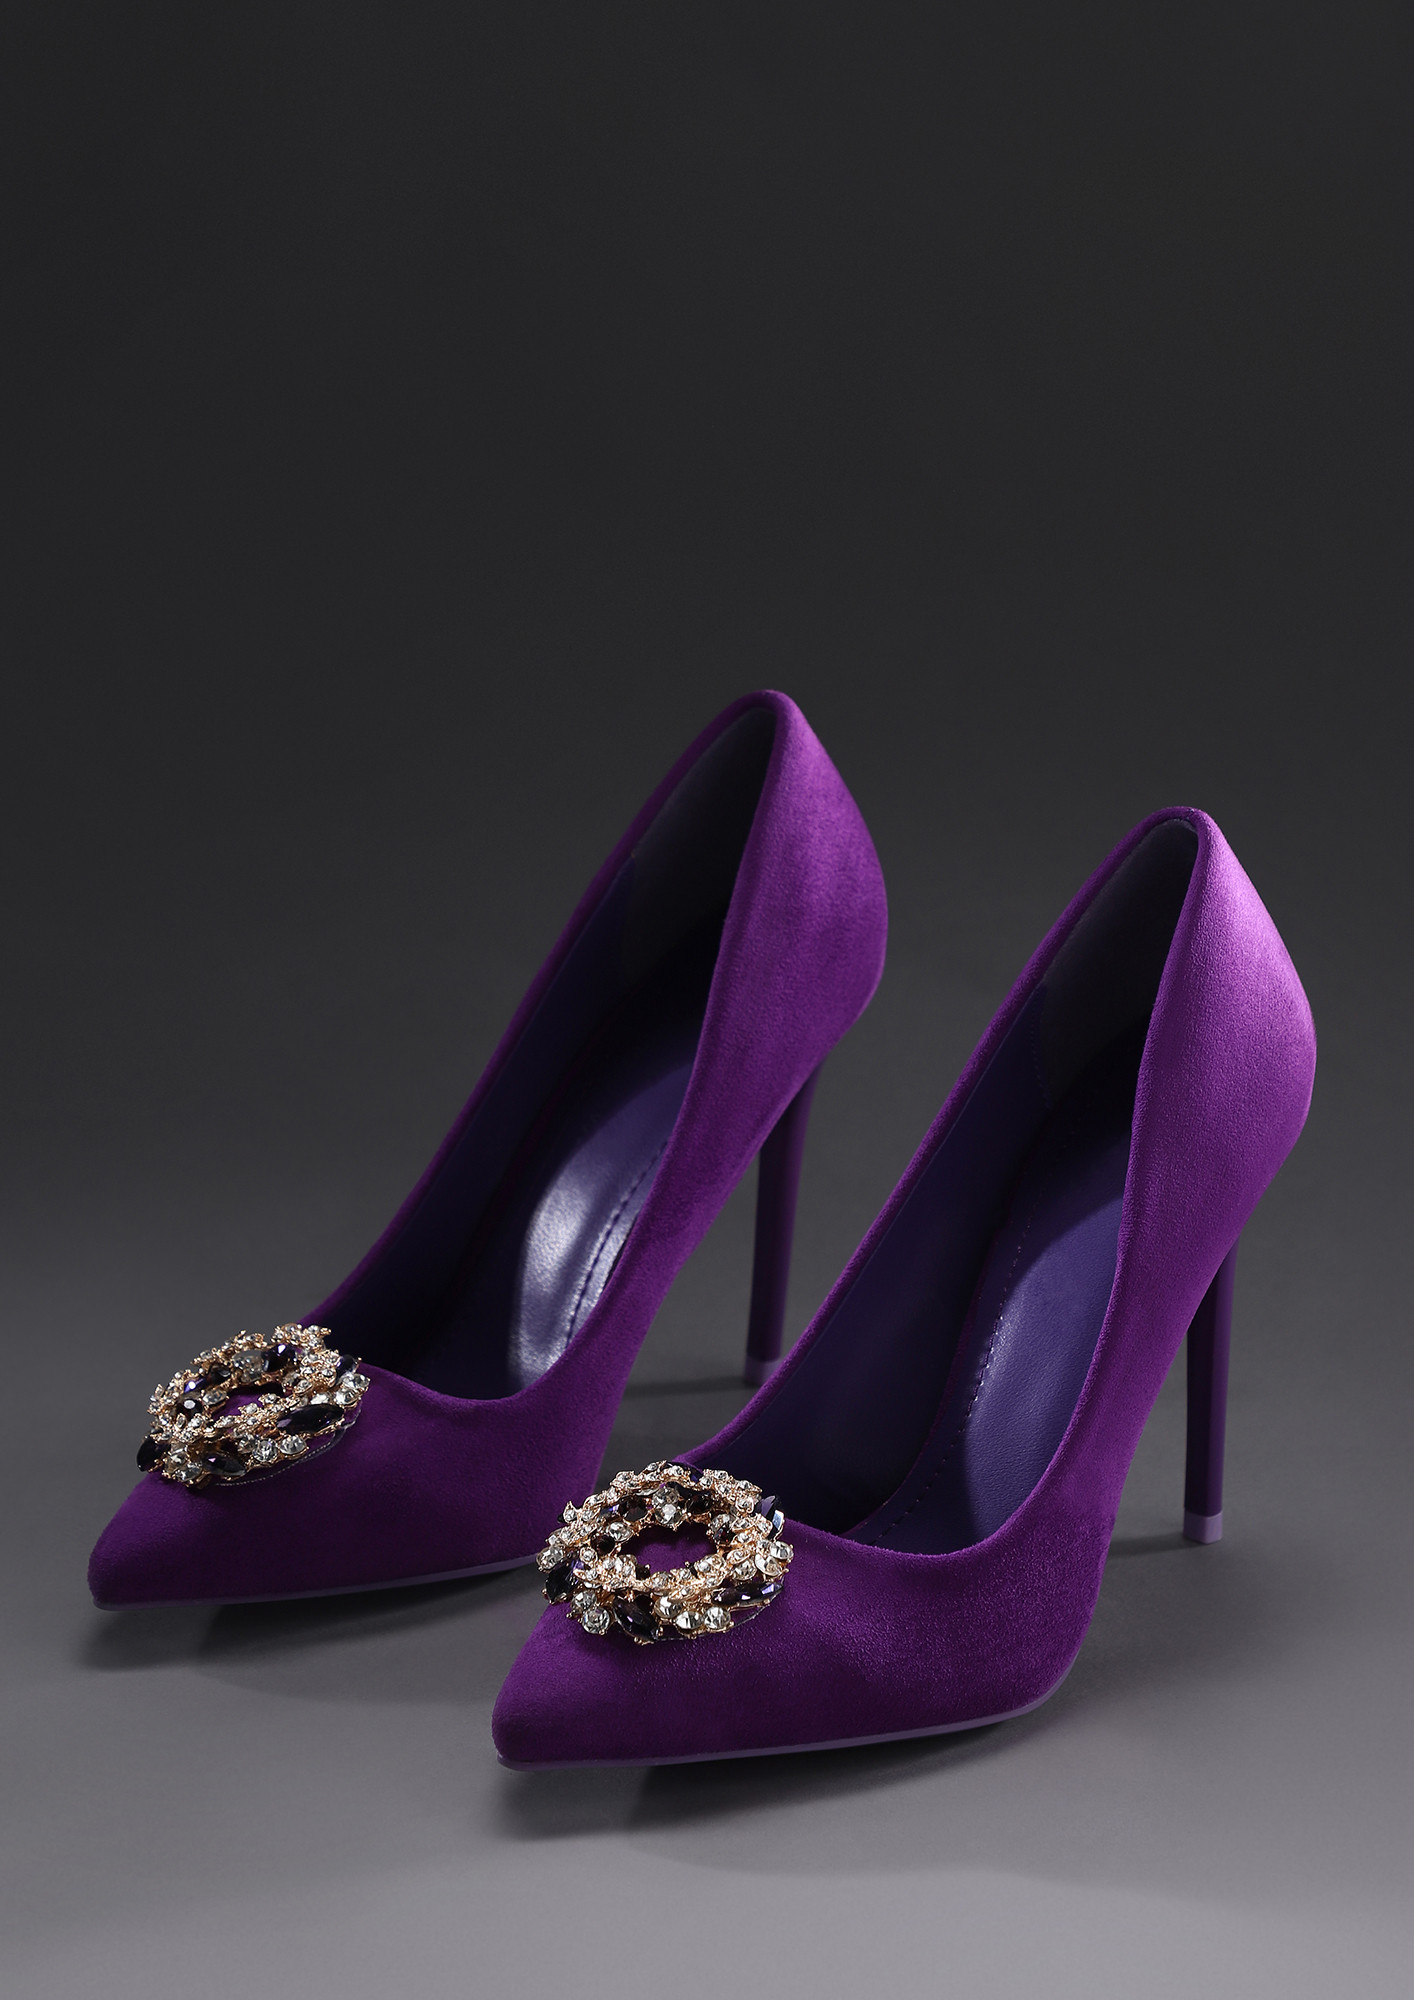 COUNTING HOURS PURPLE PUMPS